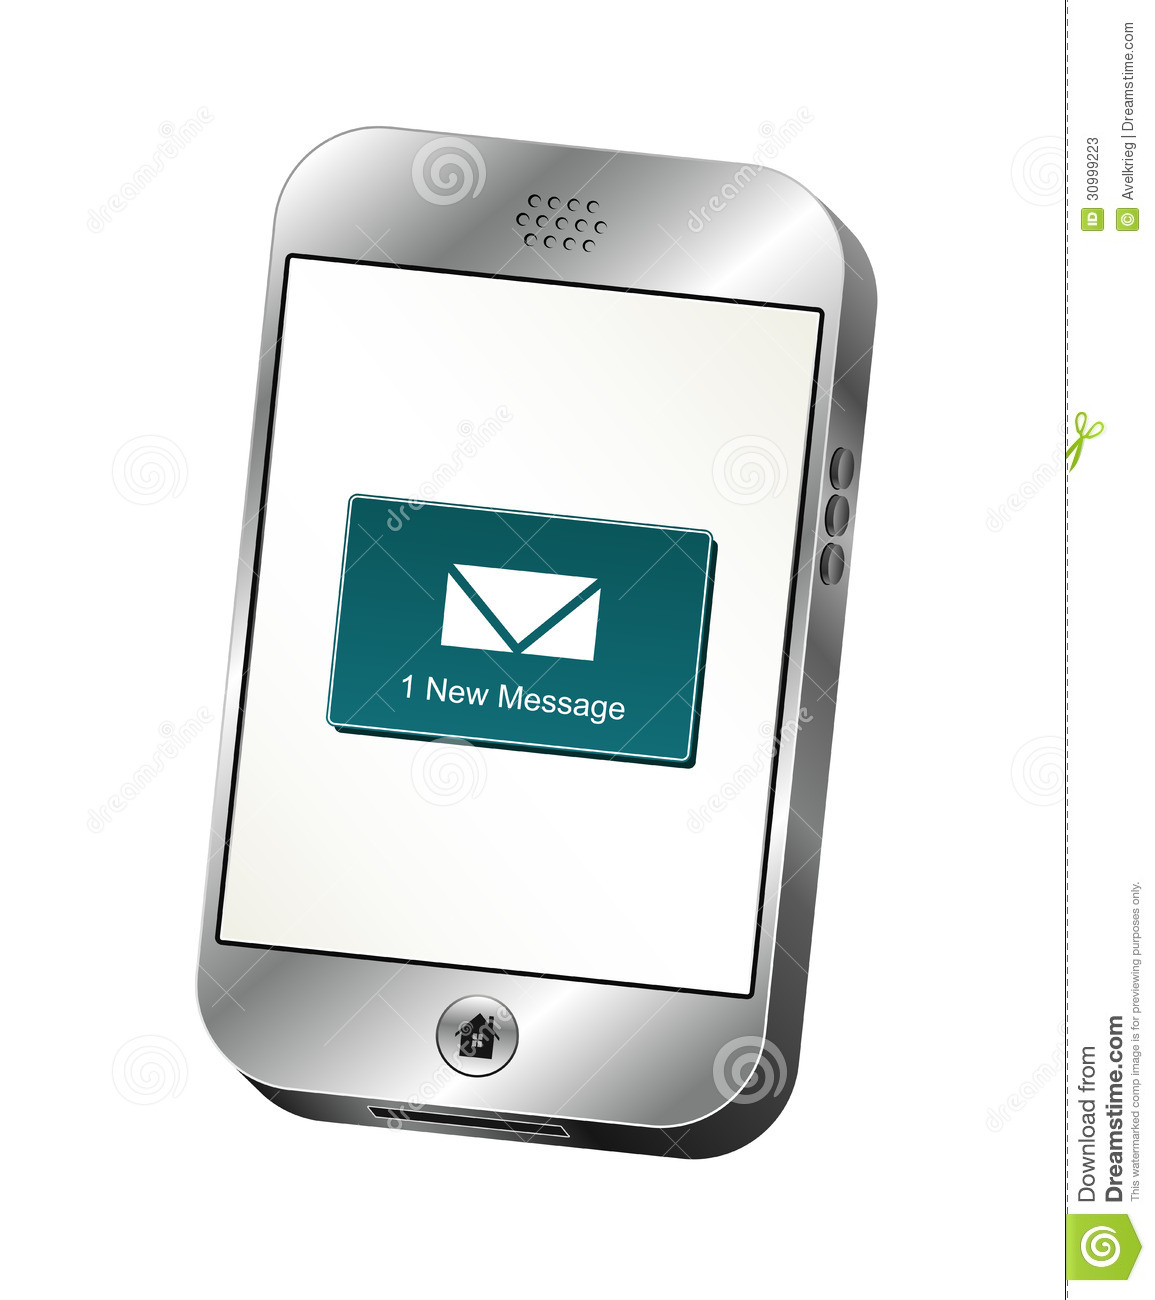 Illustration Of A Silver Smart Phone Displaying A New Message Alert